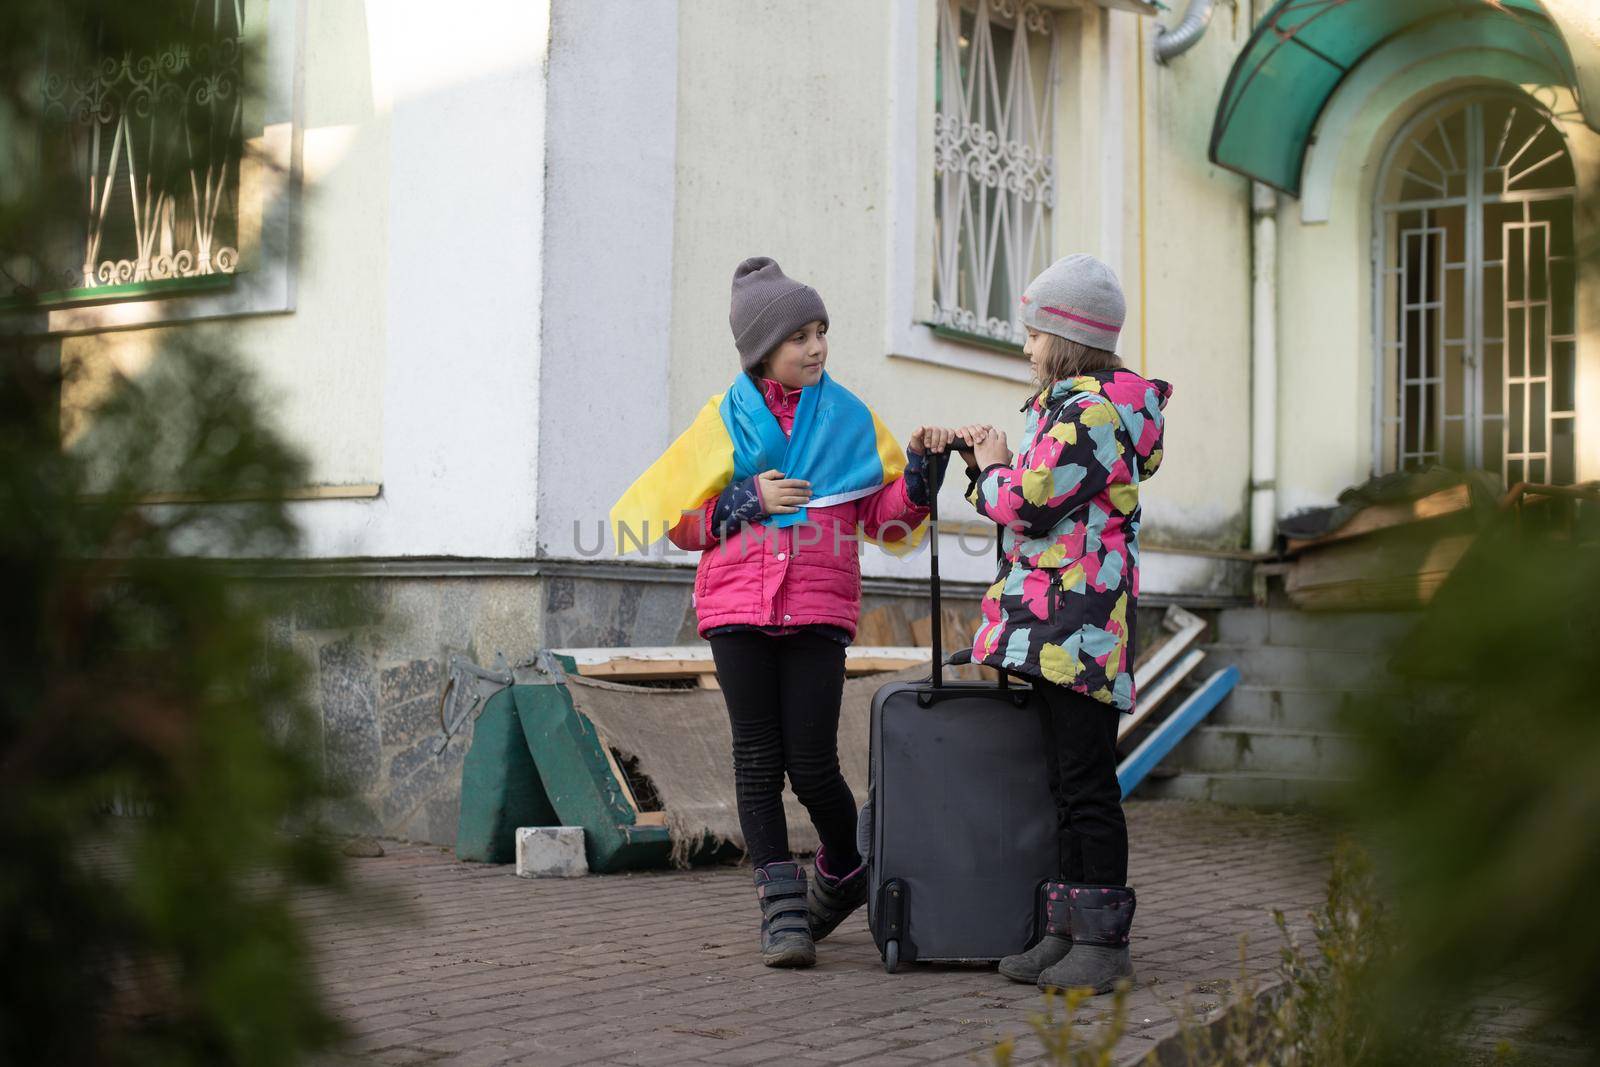 Ukraine military migration. two little girls with a suitcase. Flag of Ukraine, help. Crisis, military conflict.